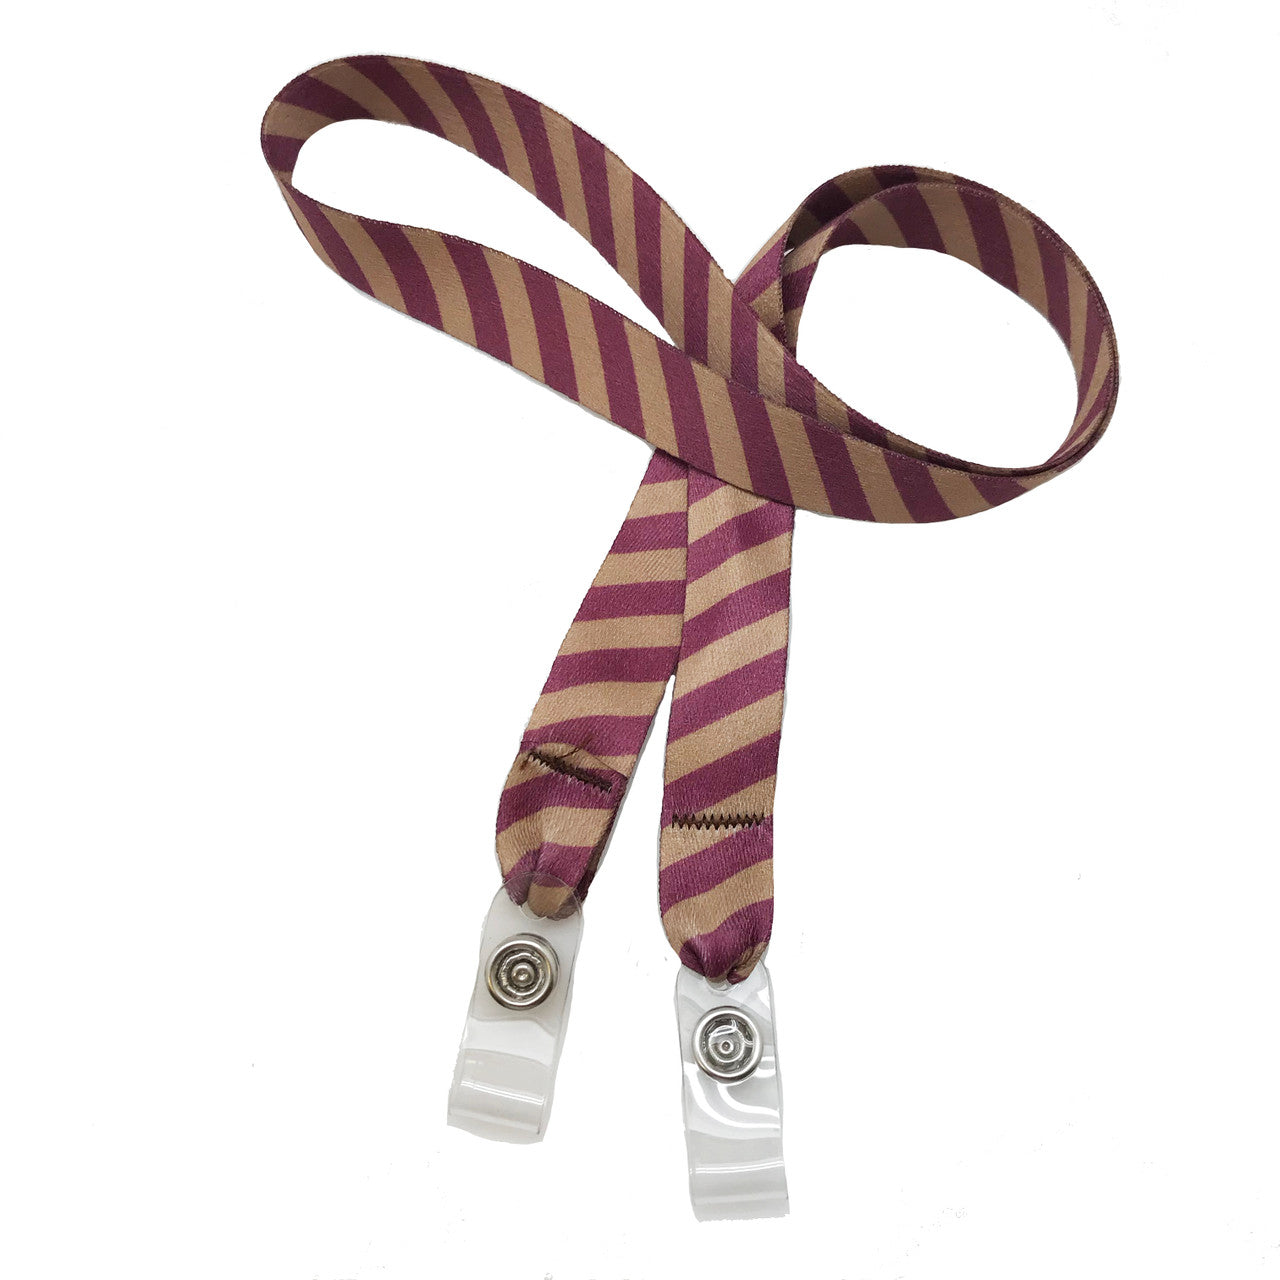 24" mask holder with soft plastic snap closures printed with ourrburgundy and gold stripe printed on both sides on  5/8" Ultra Lanyard material is  perfect for adults to keep track of face masks at  work, school, sports practice, lunch and break time.